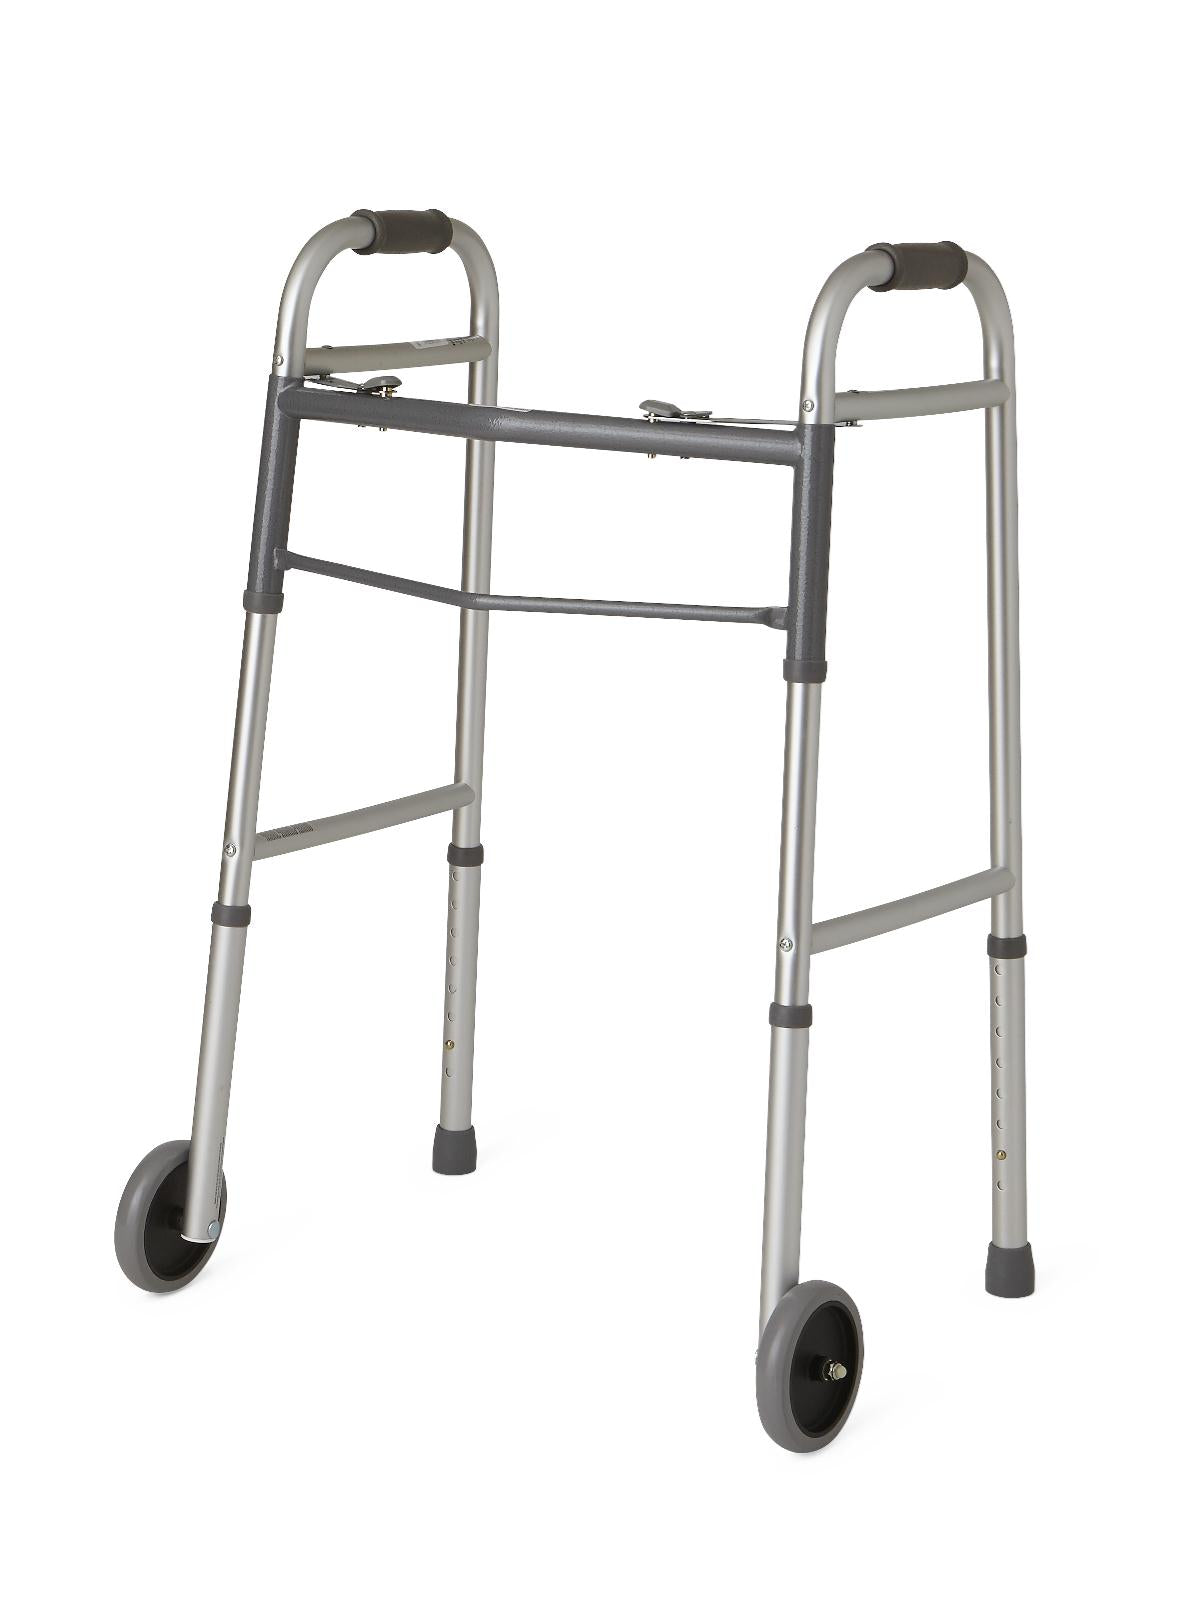 1 Each-Each / Standard / 5.000 IN Patient Safety & Mobility - MEDLINE - Wasatch Medical Supply